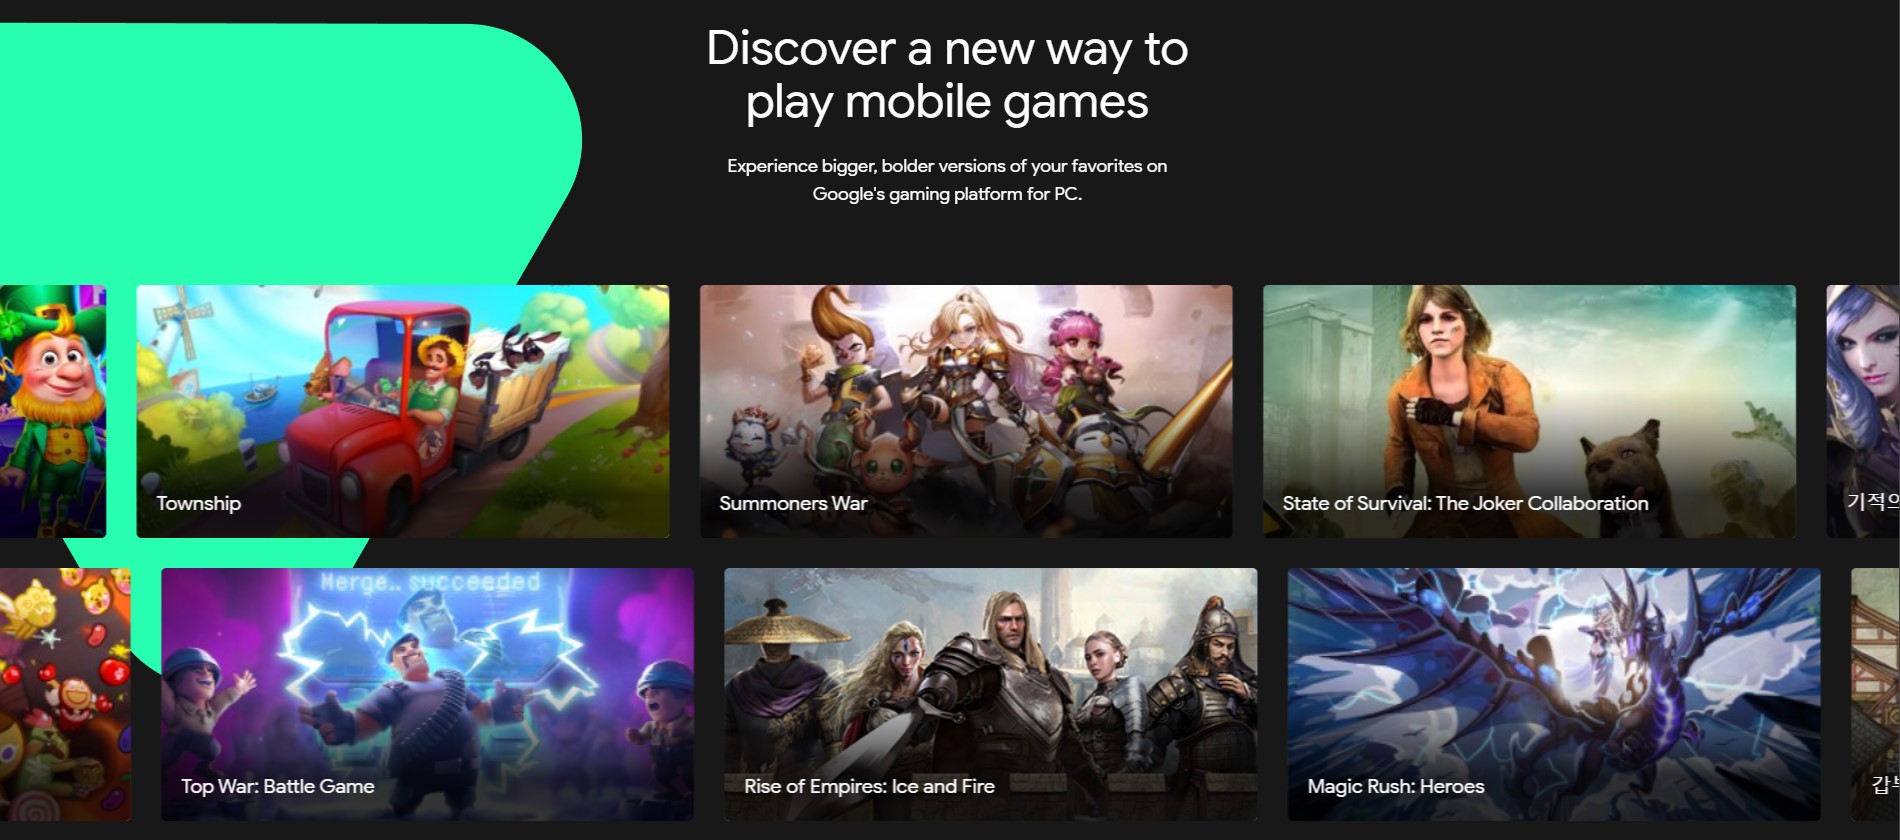 Will you play Google Play games on your Windows PC?